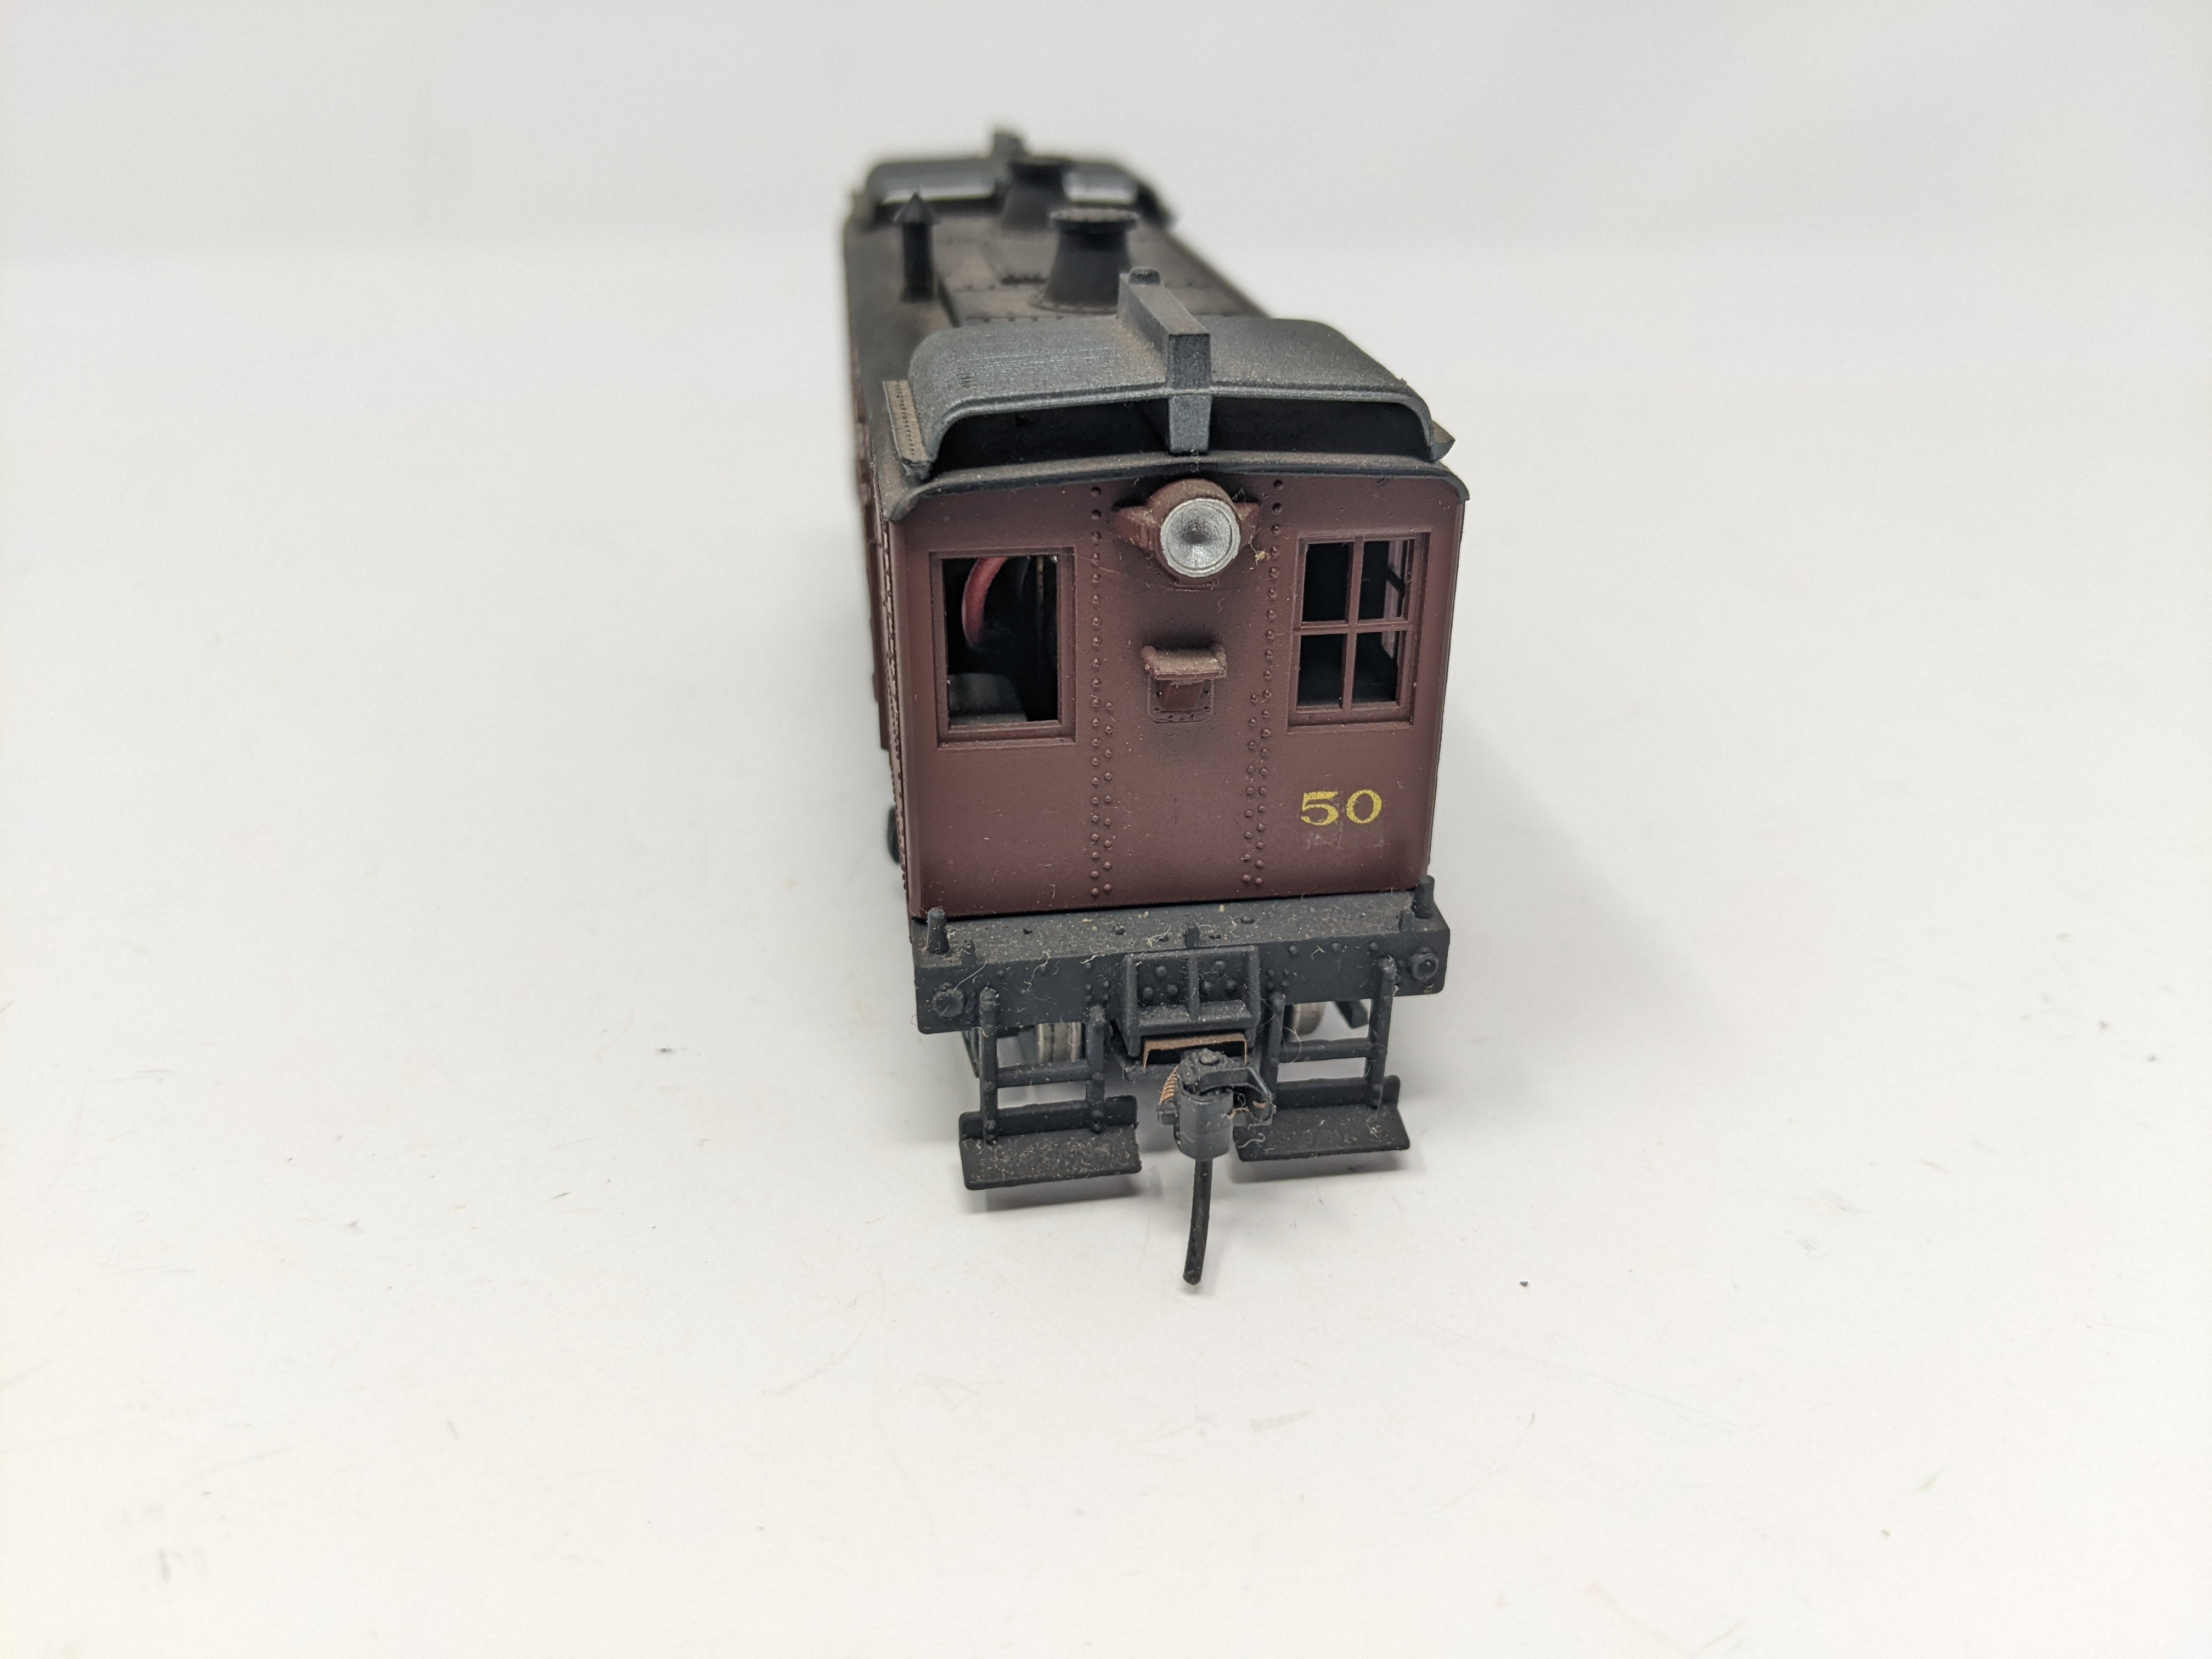 USED HO Scale, Diesel Locomotive, RB&E #50